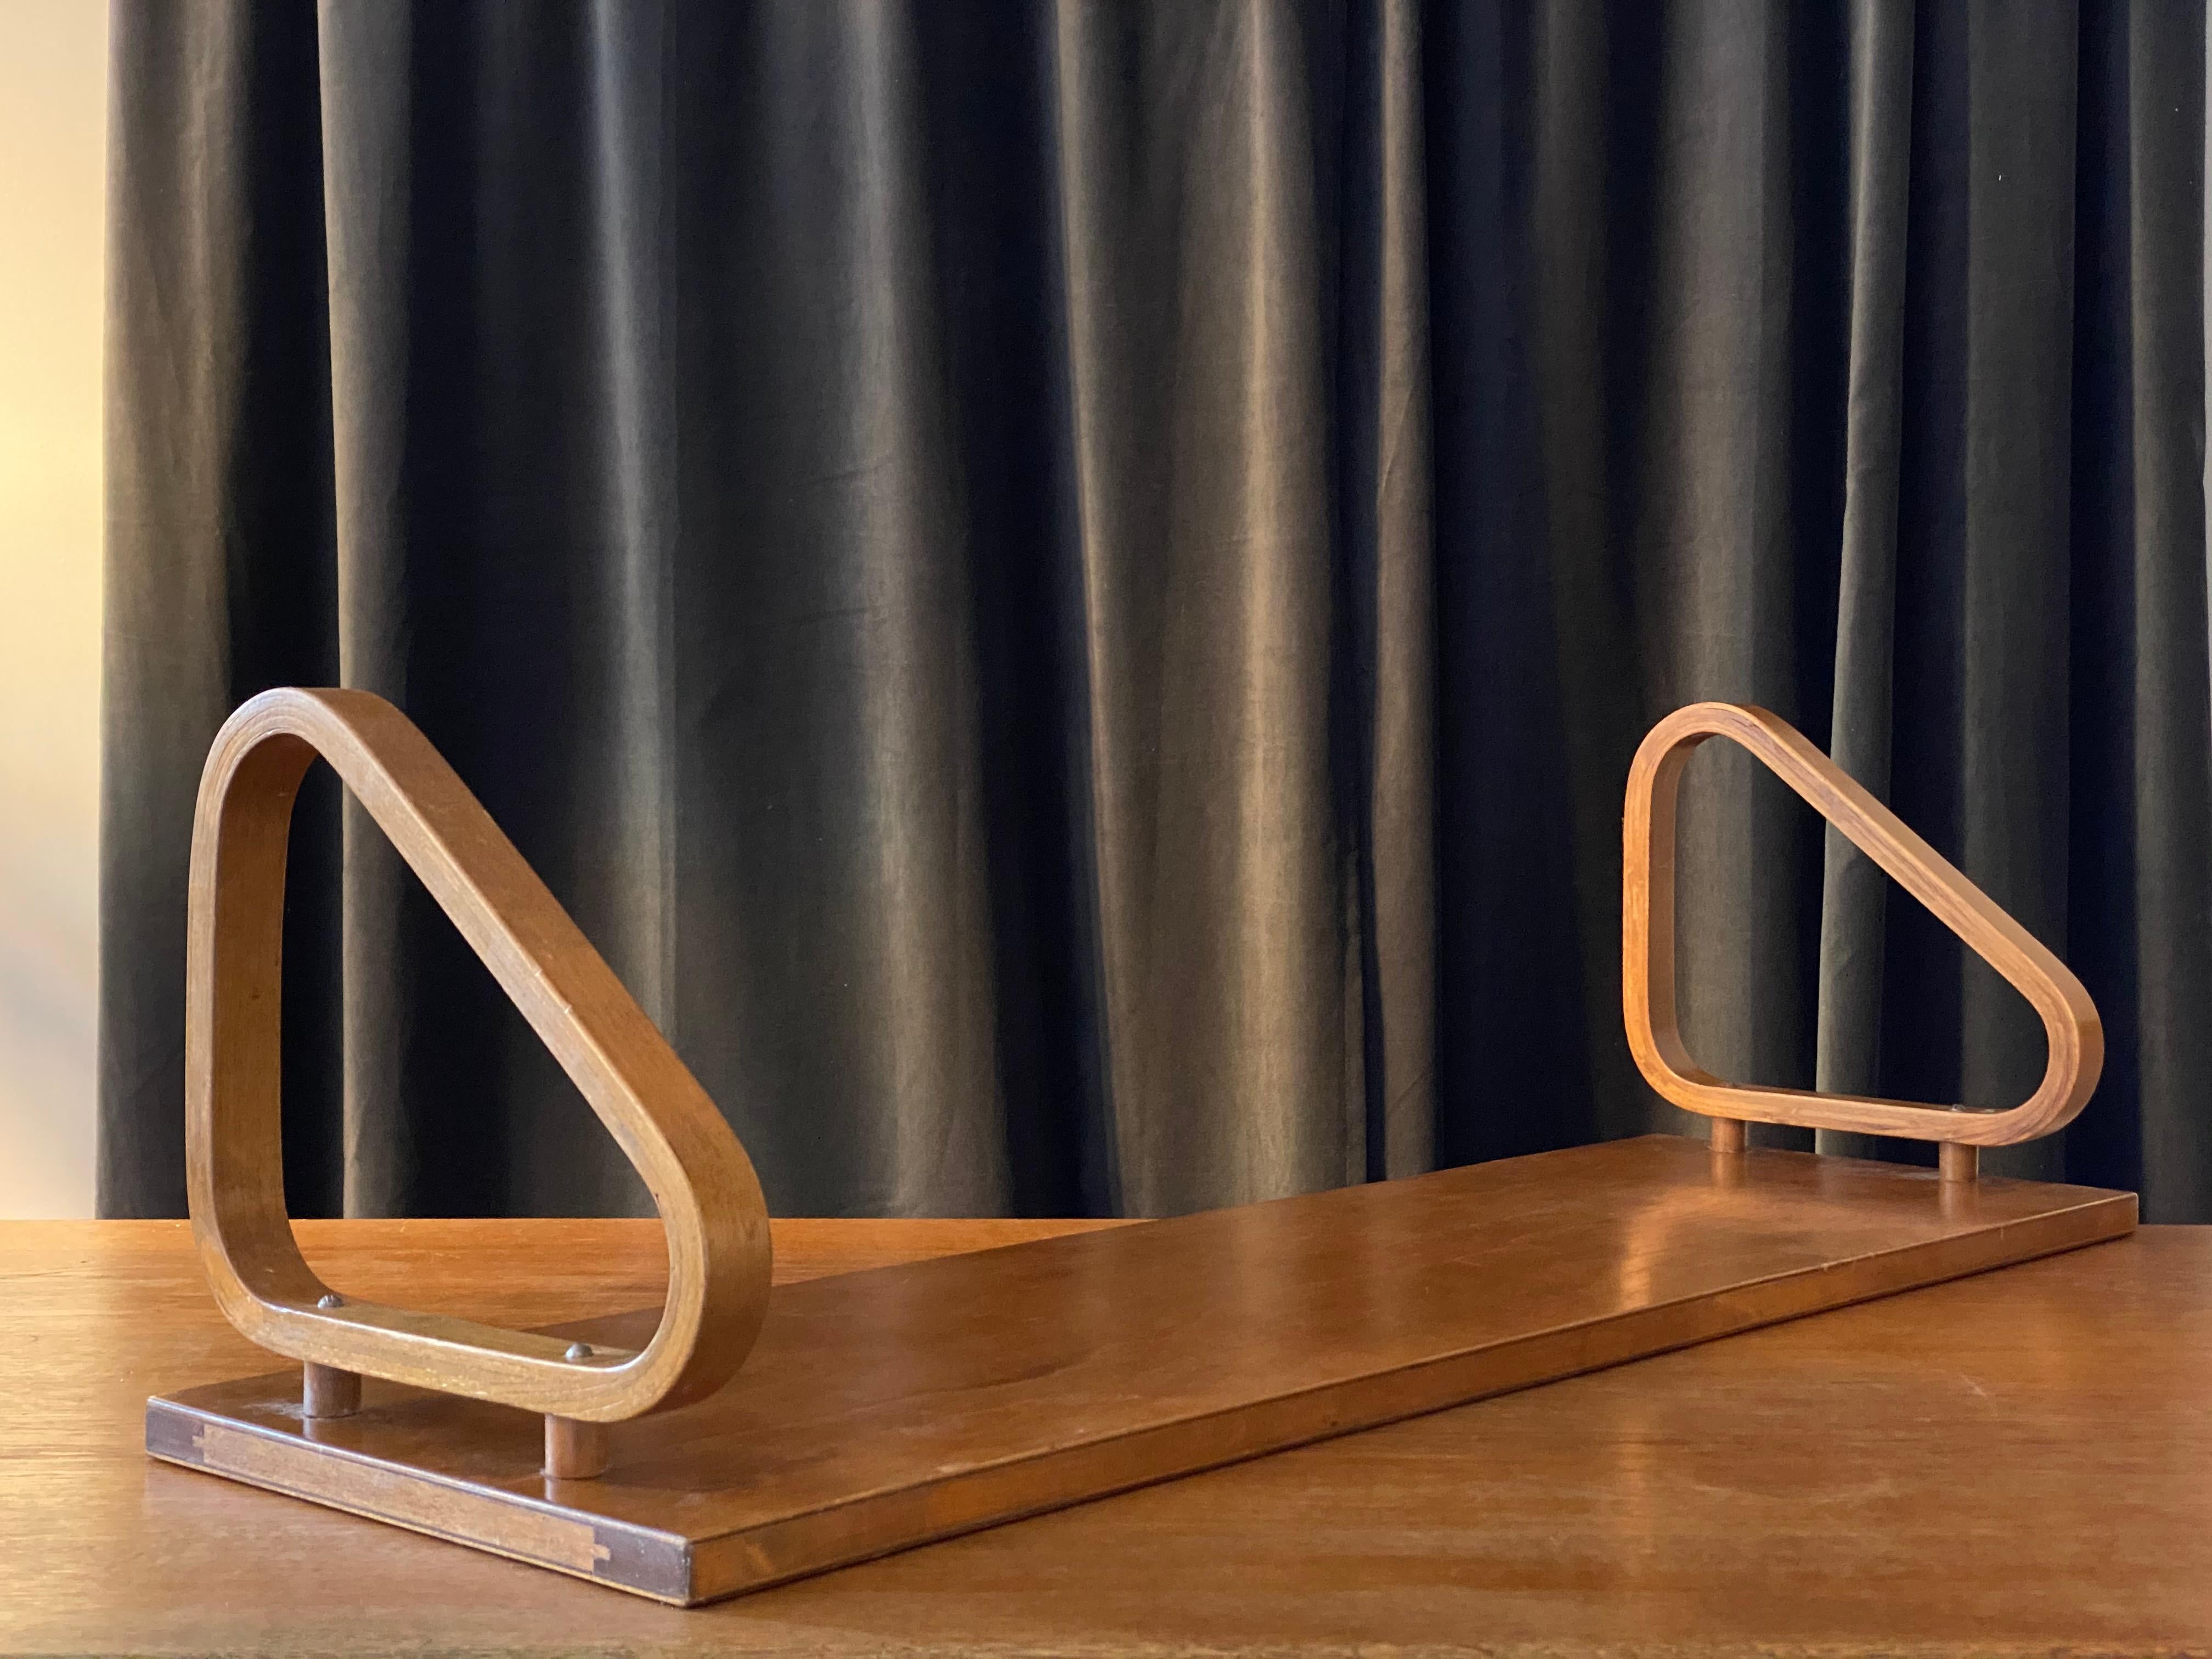 A rare version wall shelf with raised wall mounting, designed by Alvar Aalto. Produced by Artek in the 1950s. Executed in stained birch. 

Other designers of the period include Charlotte Perriand, Pierre Chapo, Josef Frank, Axel Einar Hjorth, and